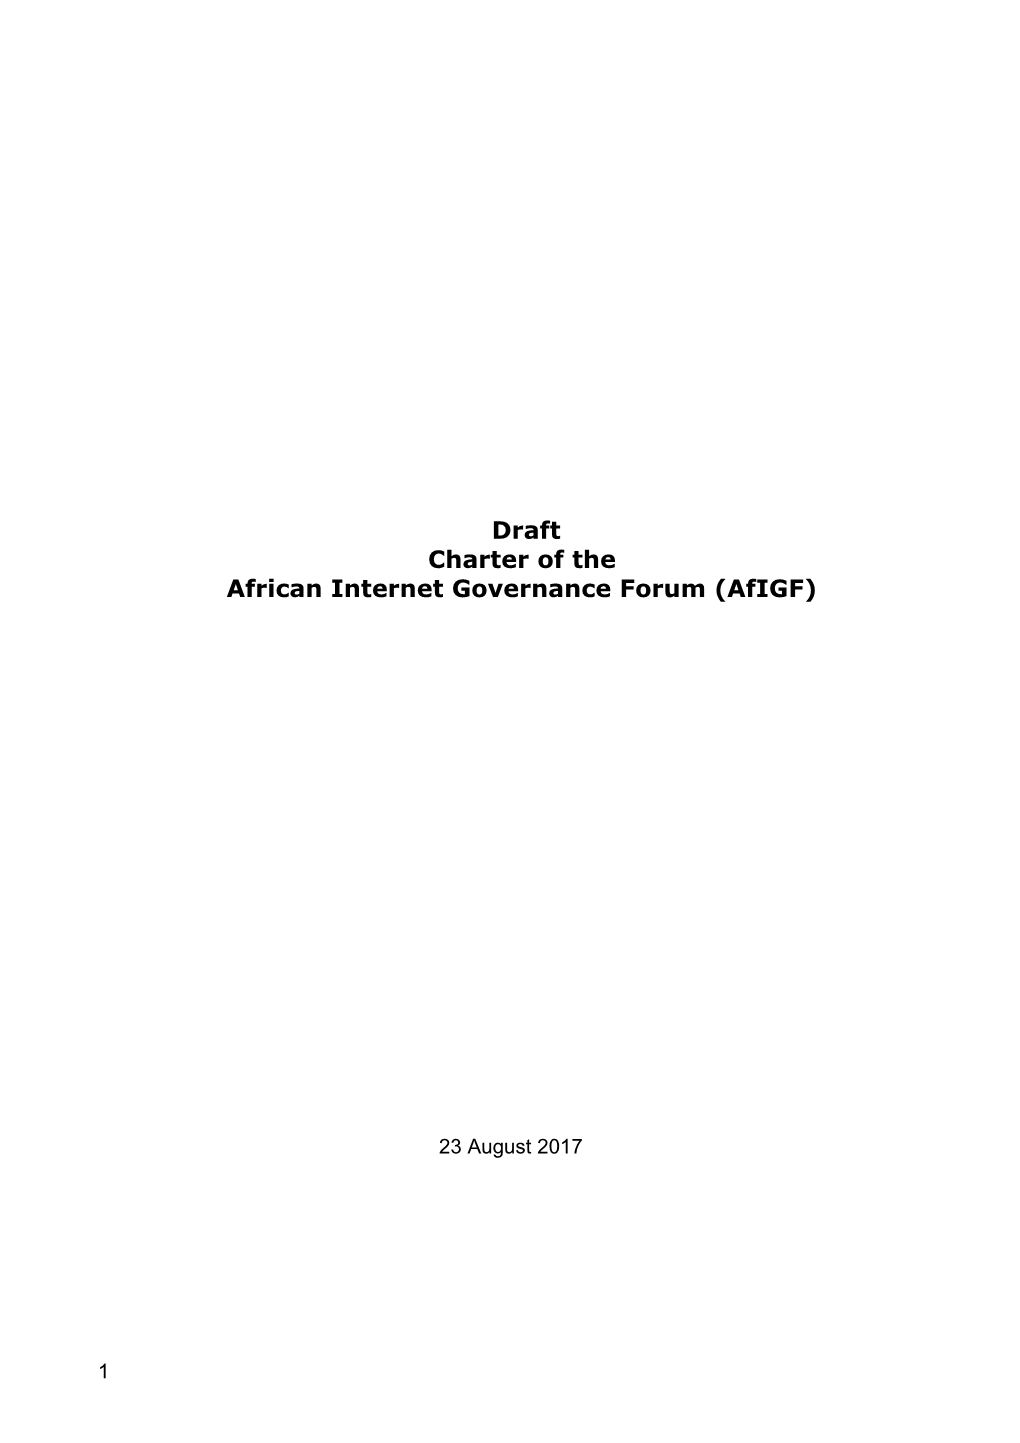 The African Internet Governance Charter Working Group